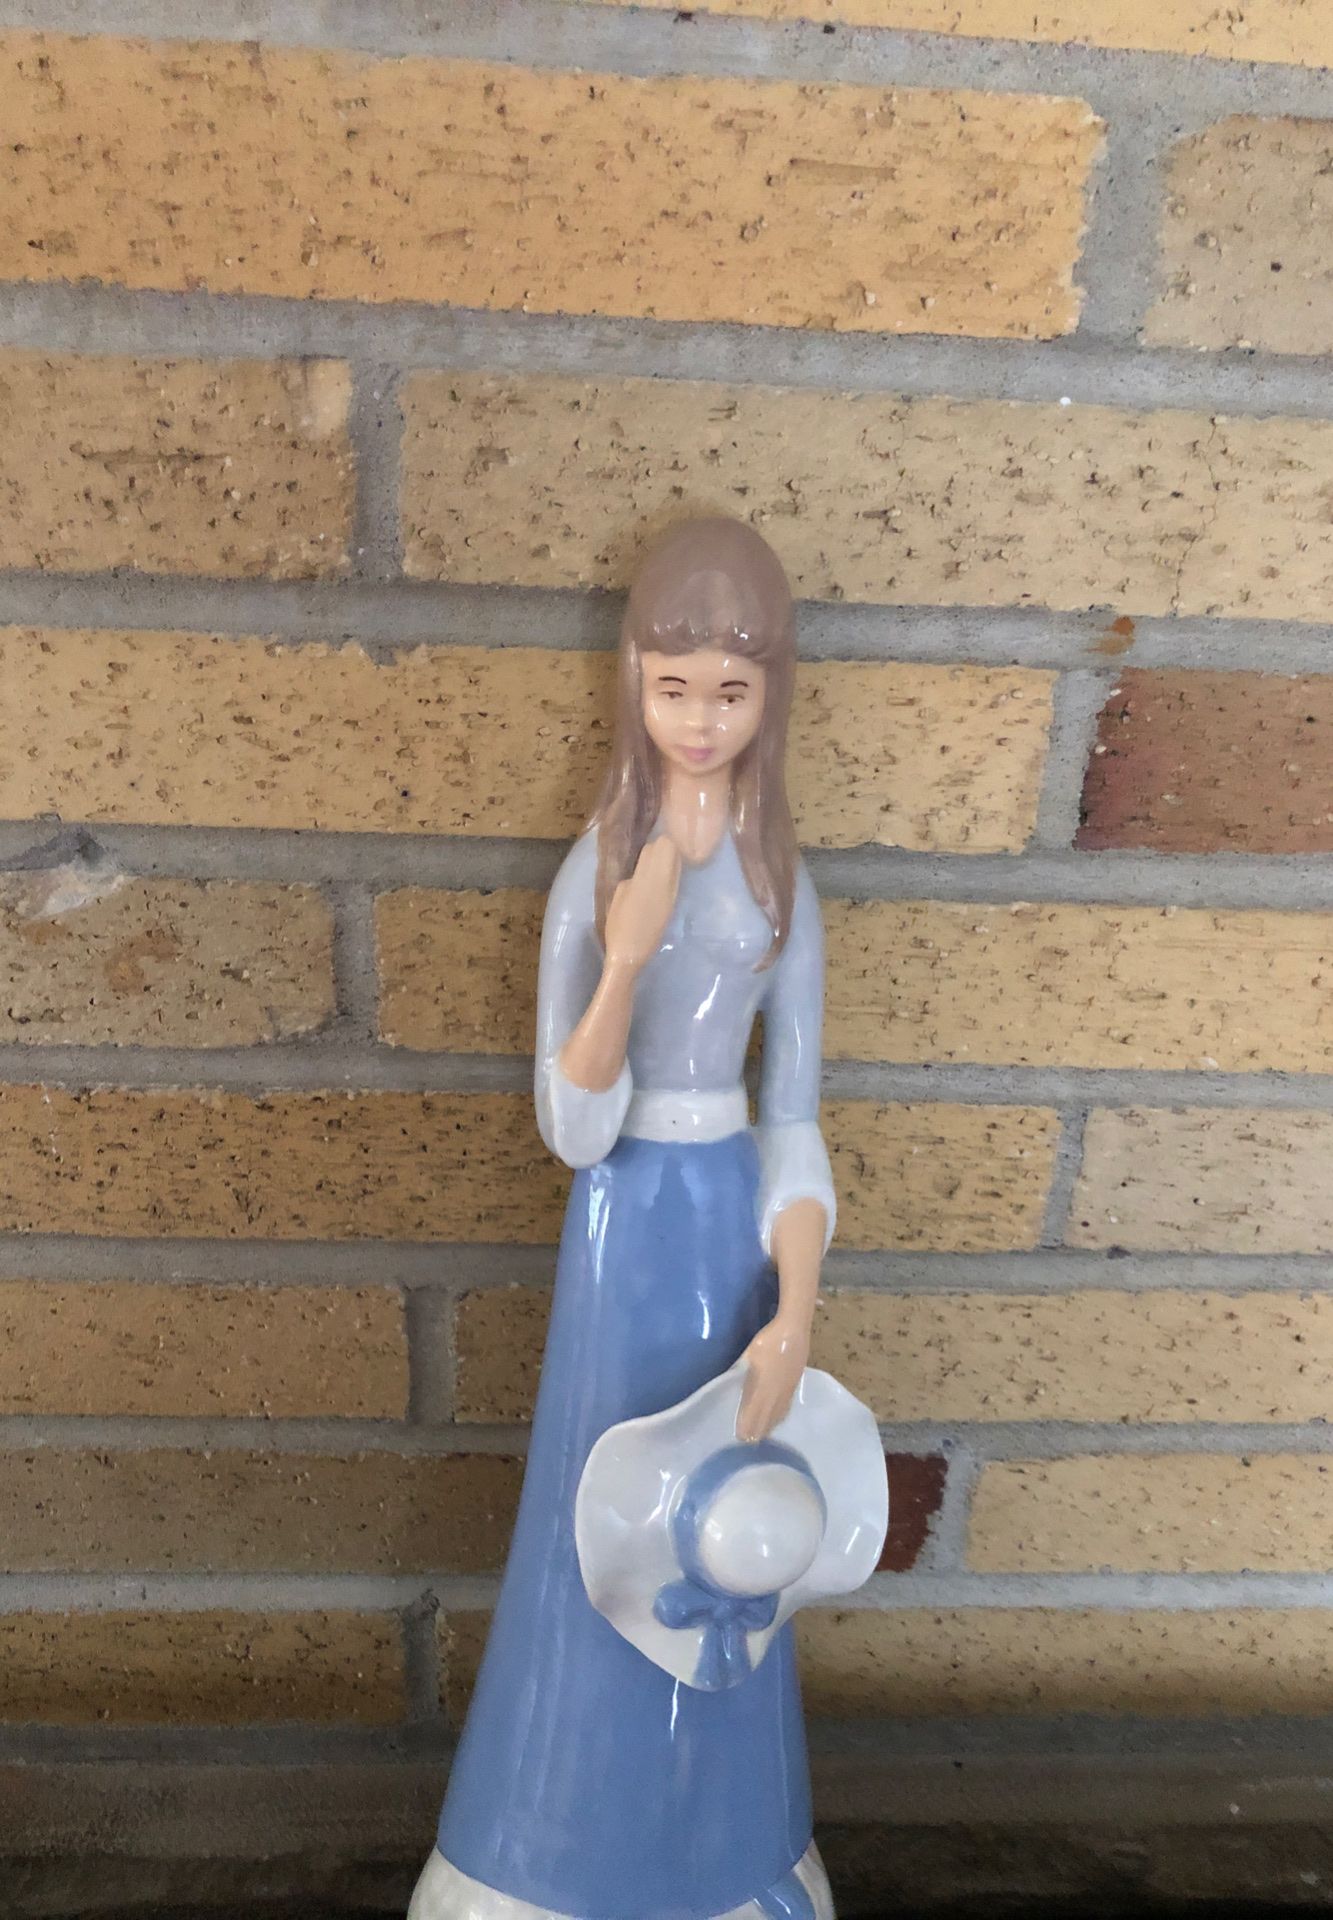 Ceramic young lady perfect condition $15.00